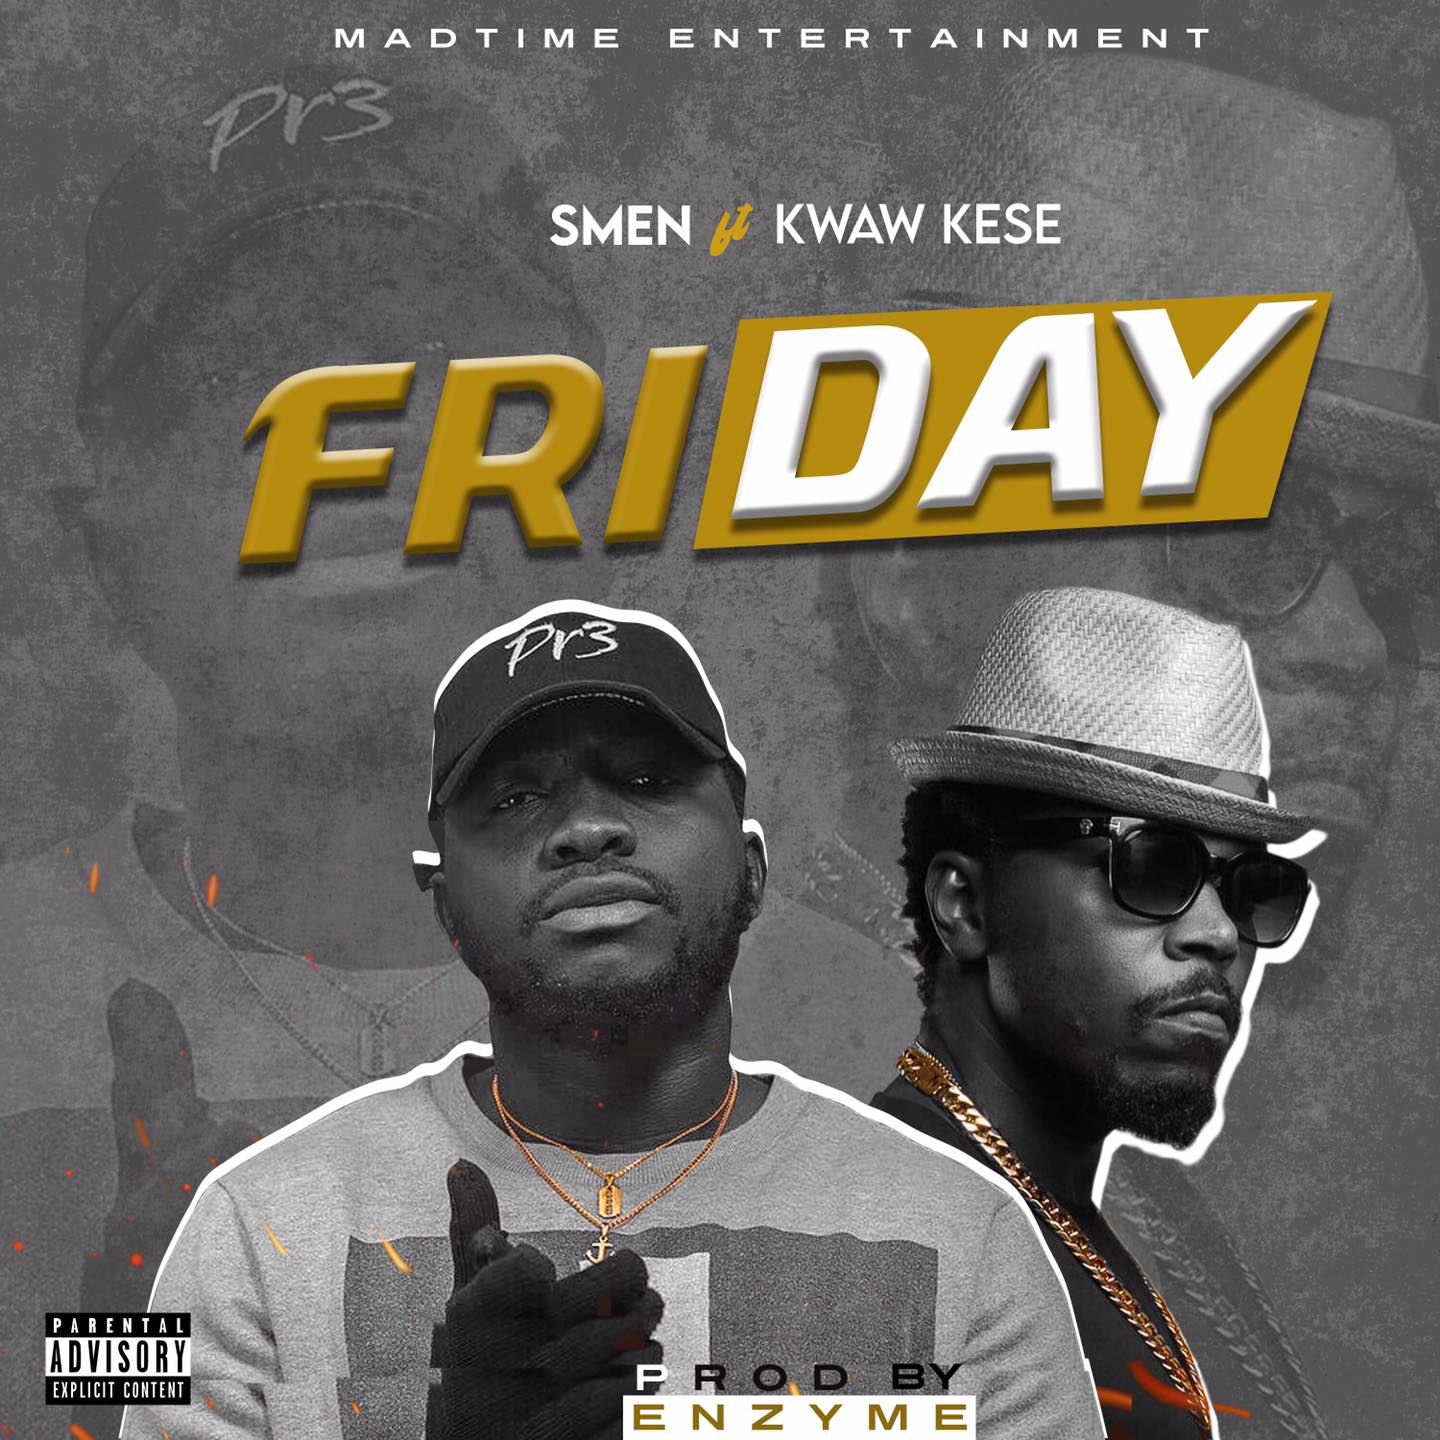 Smen ft Kwaw kese – Friday (Prod By ENZYME DEE MM BY Skonti)